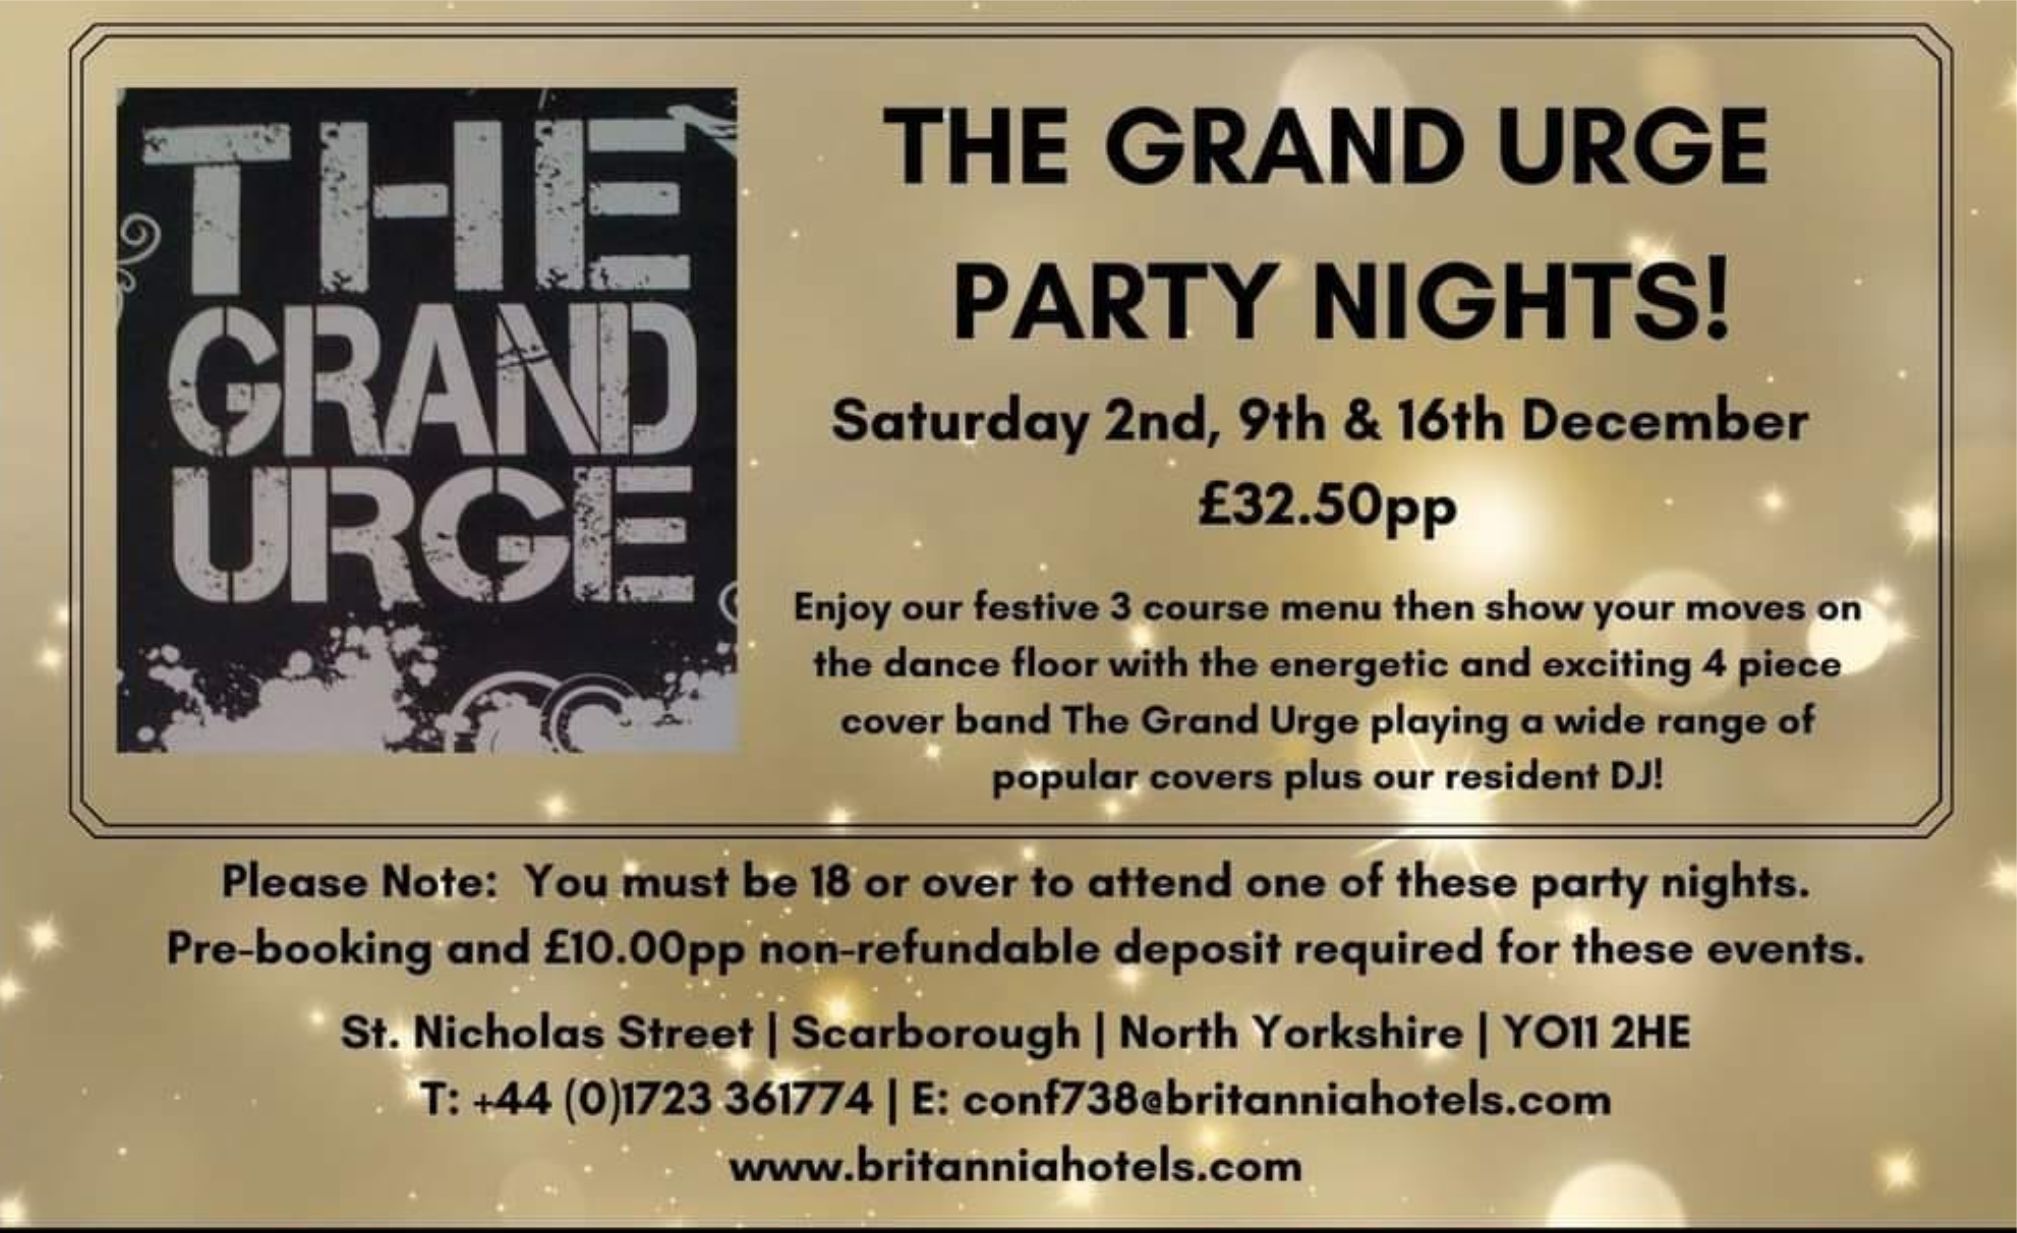 The Grand Urge Party Nights